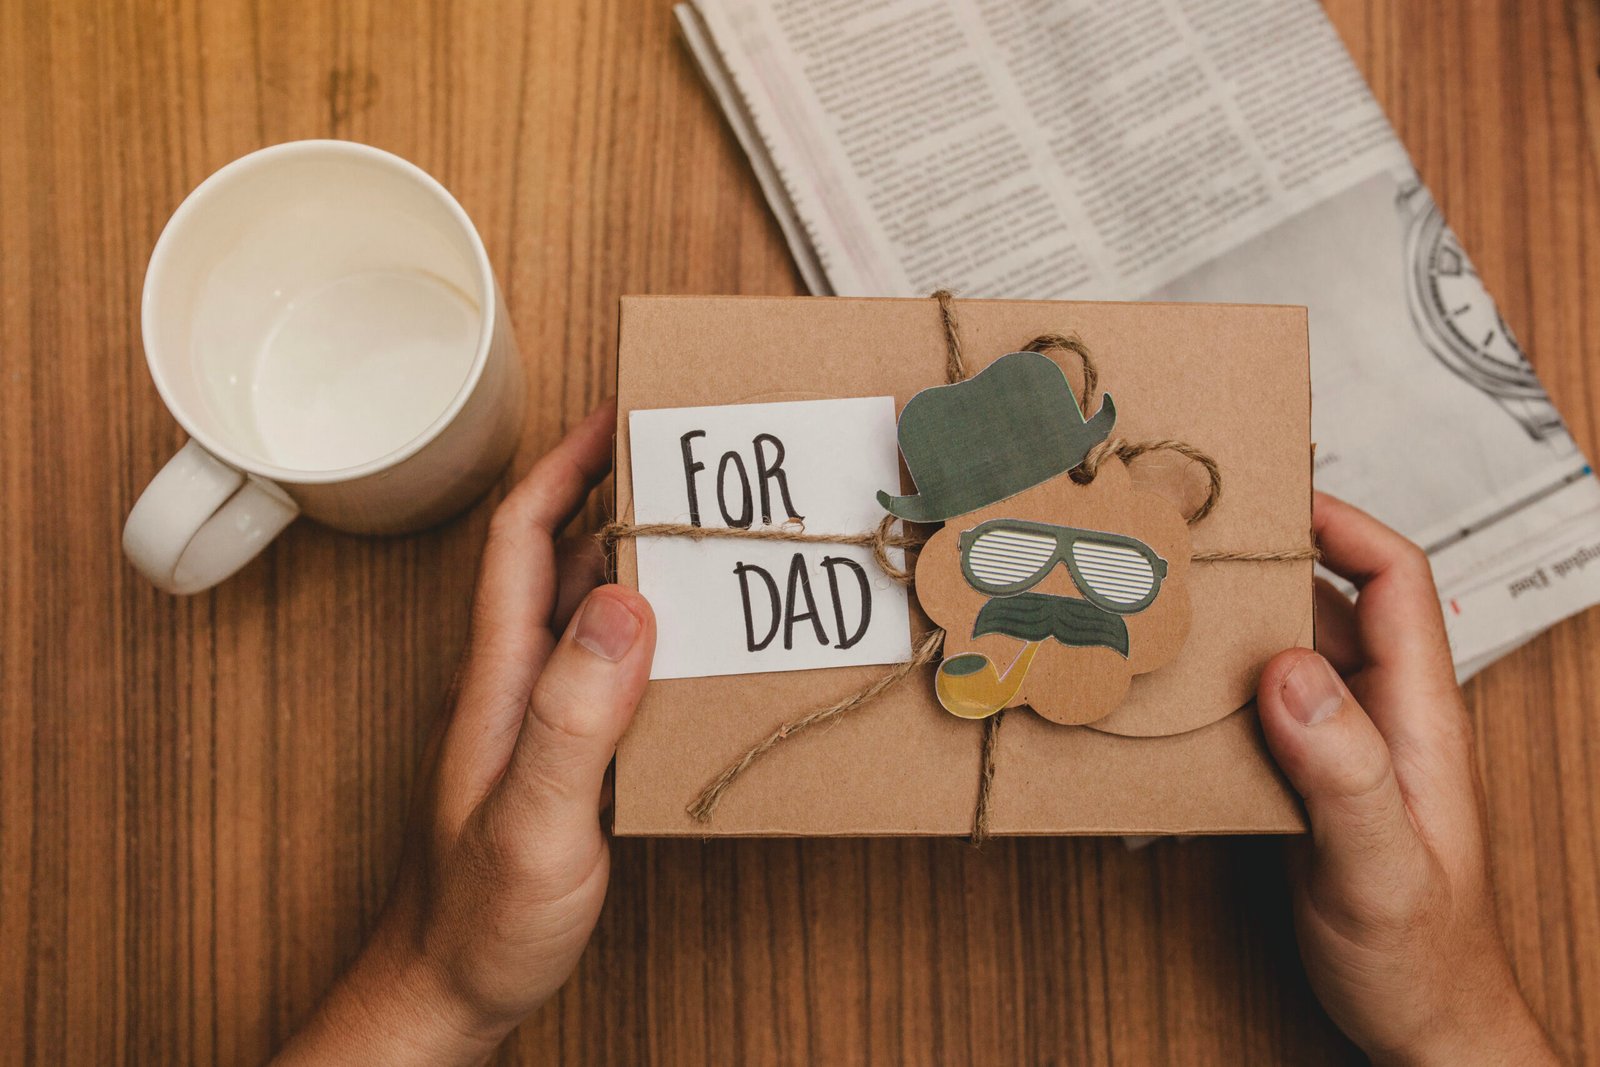 Father's day gift ideas.